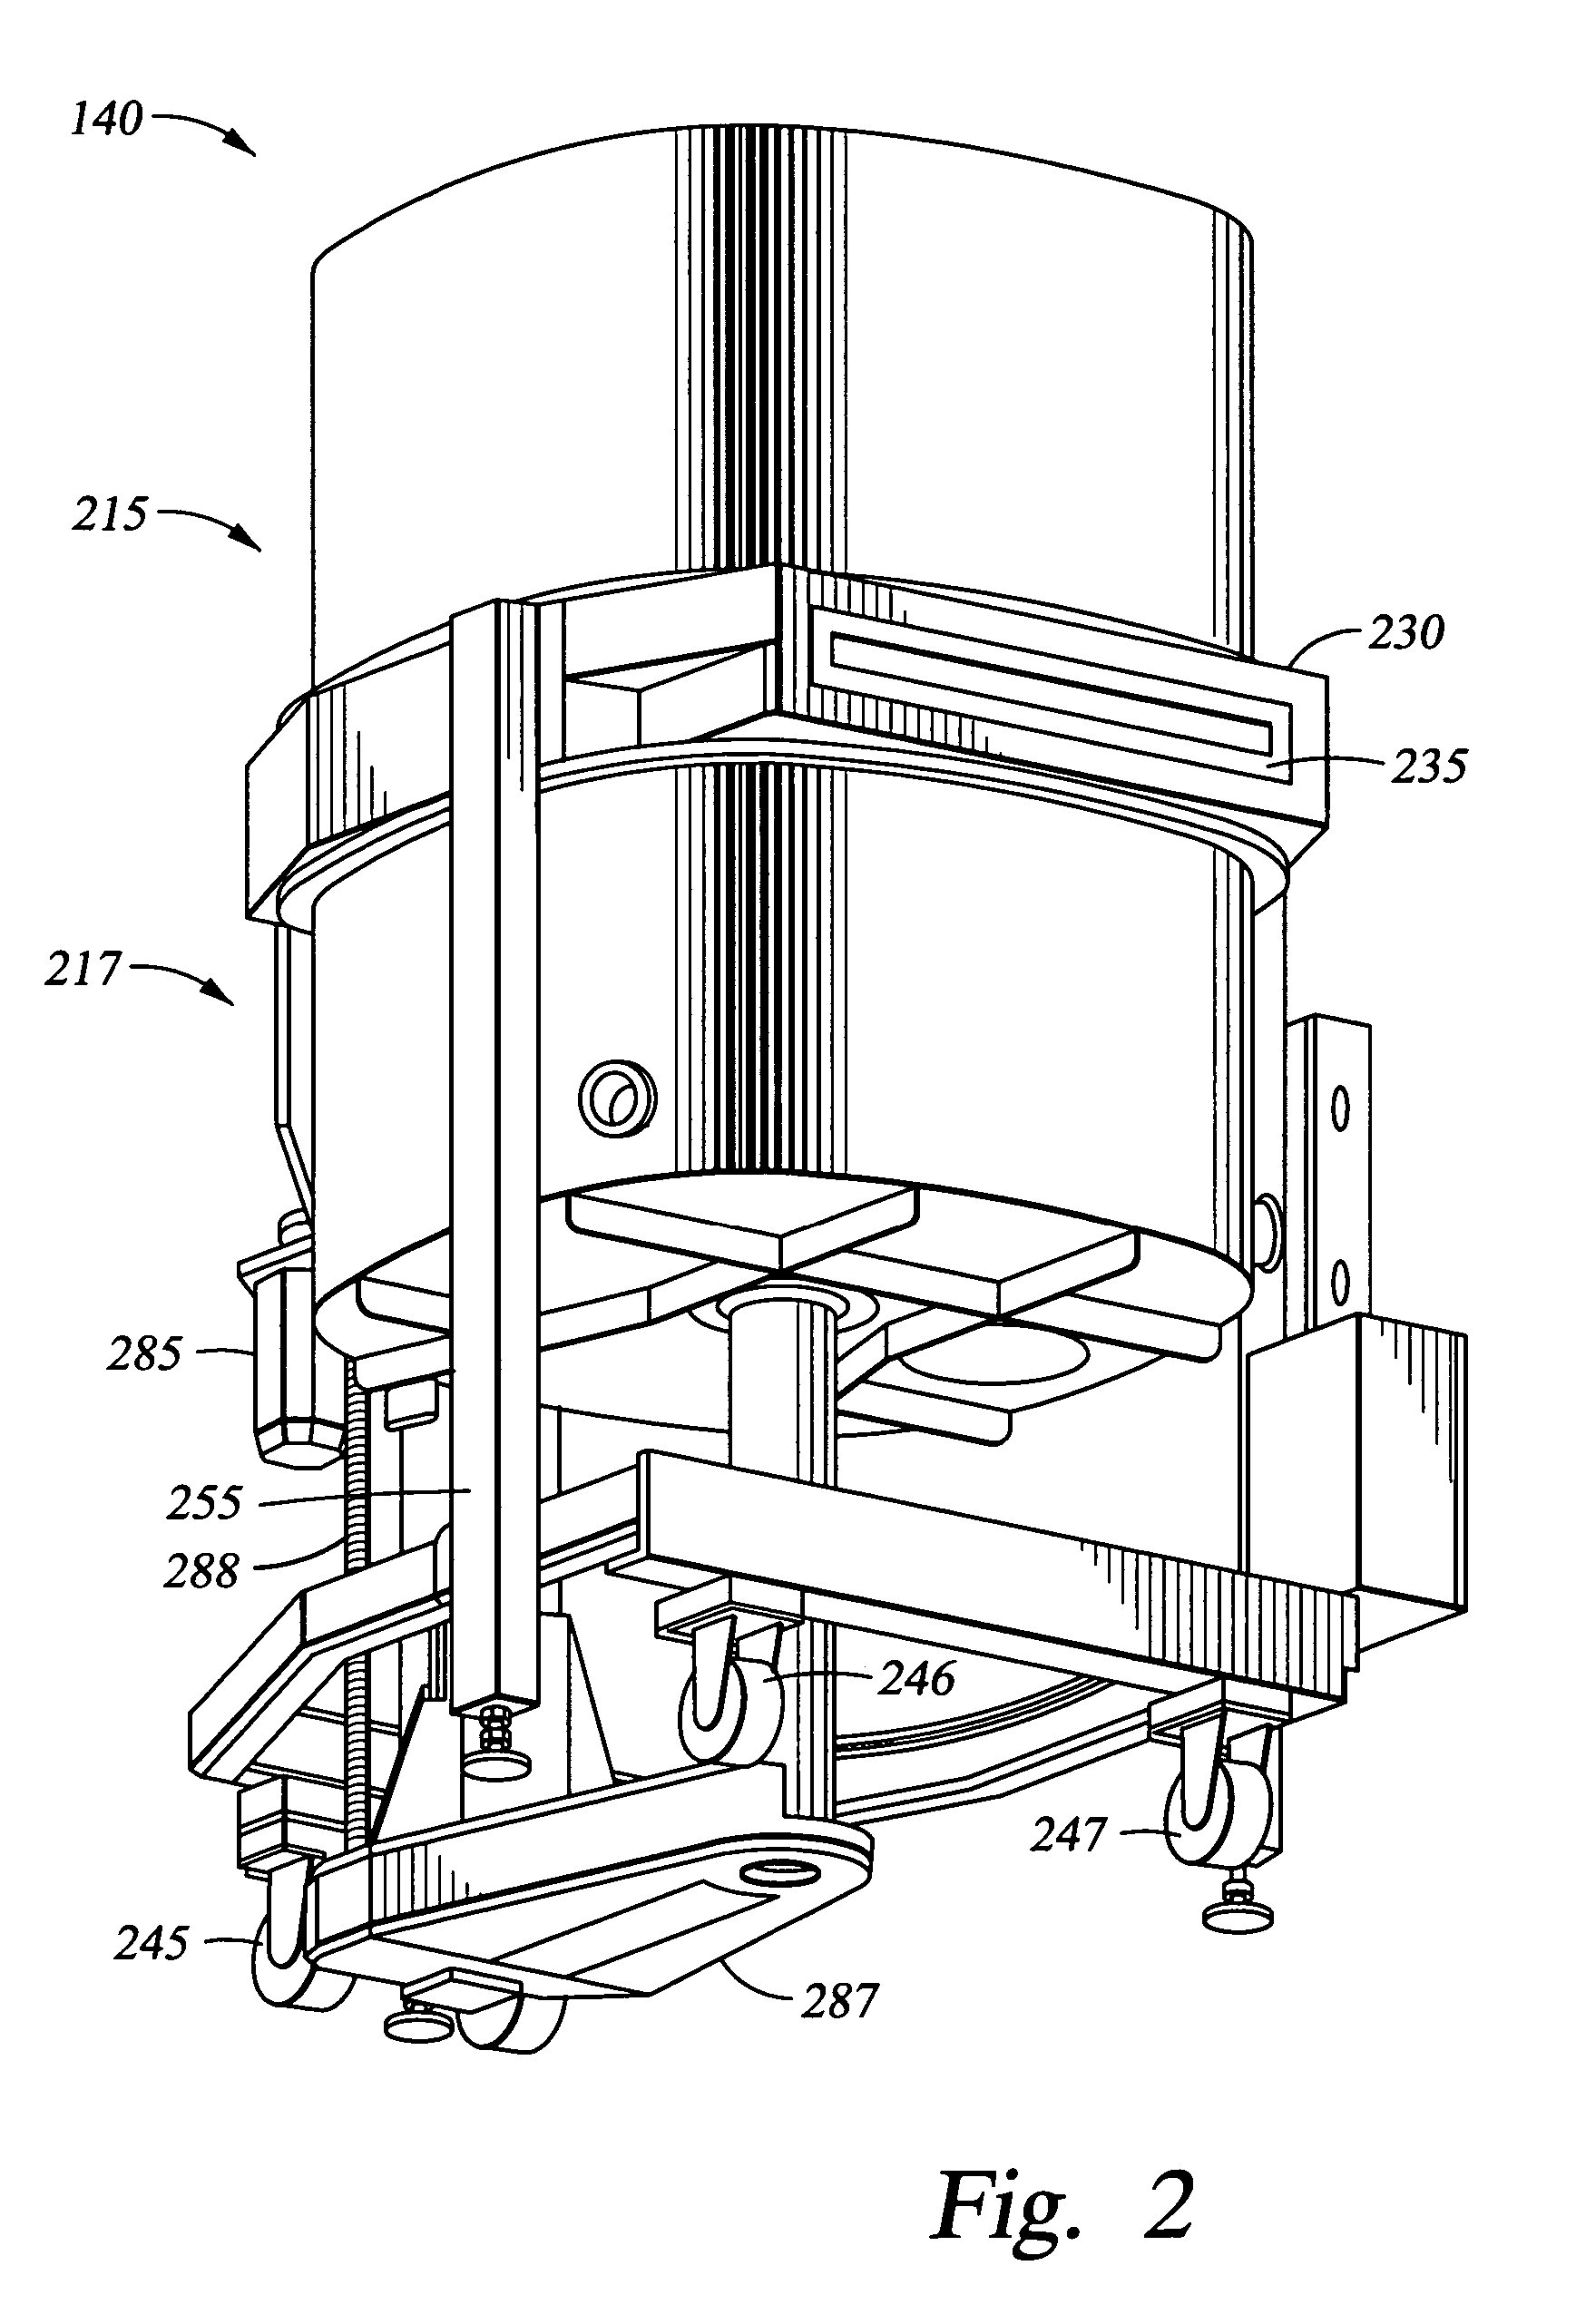 Chamber for uniform substrate heating